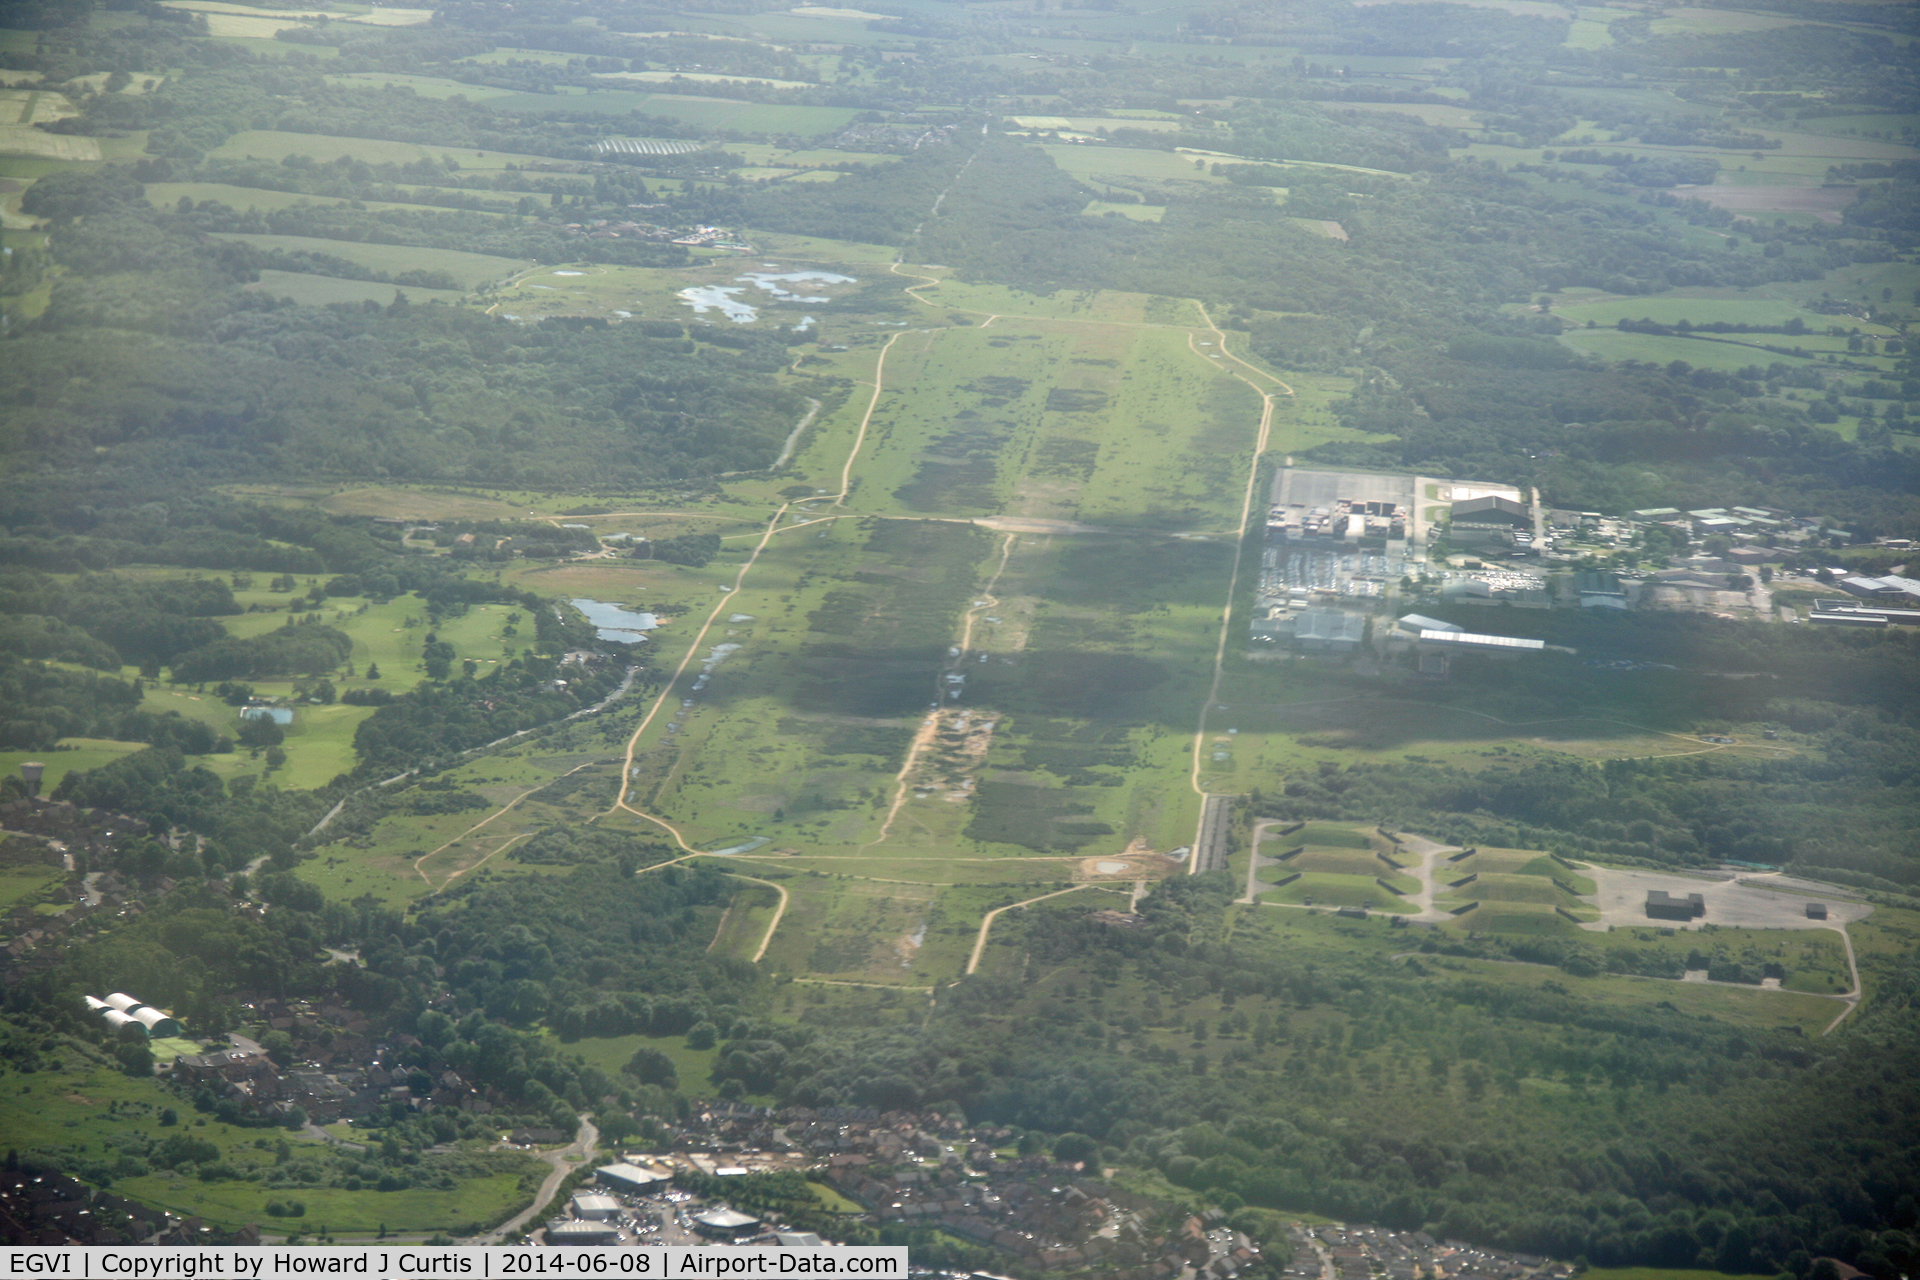 EGVI Airport - The former RAF and USAF base at Greenham Common, as seen from Bulldog G-GRRR. The main runway can just be picked out to the right of centre. Now being returned to nature, some hardened shelters still remain (lower right).